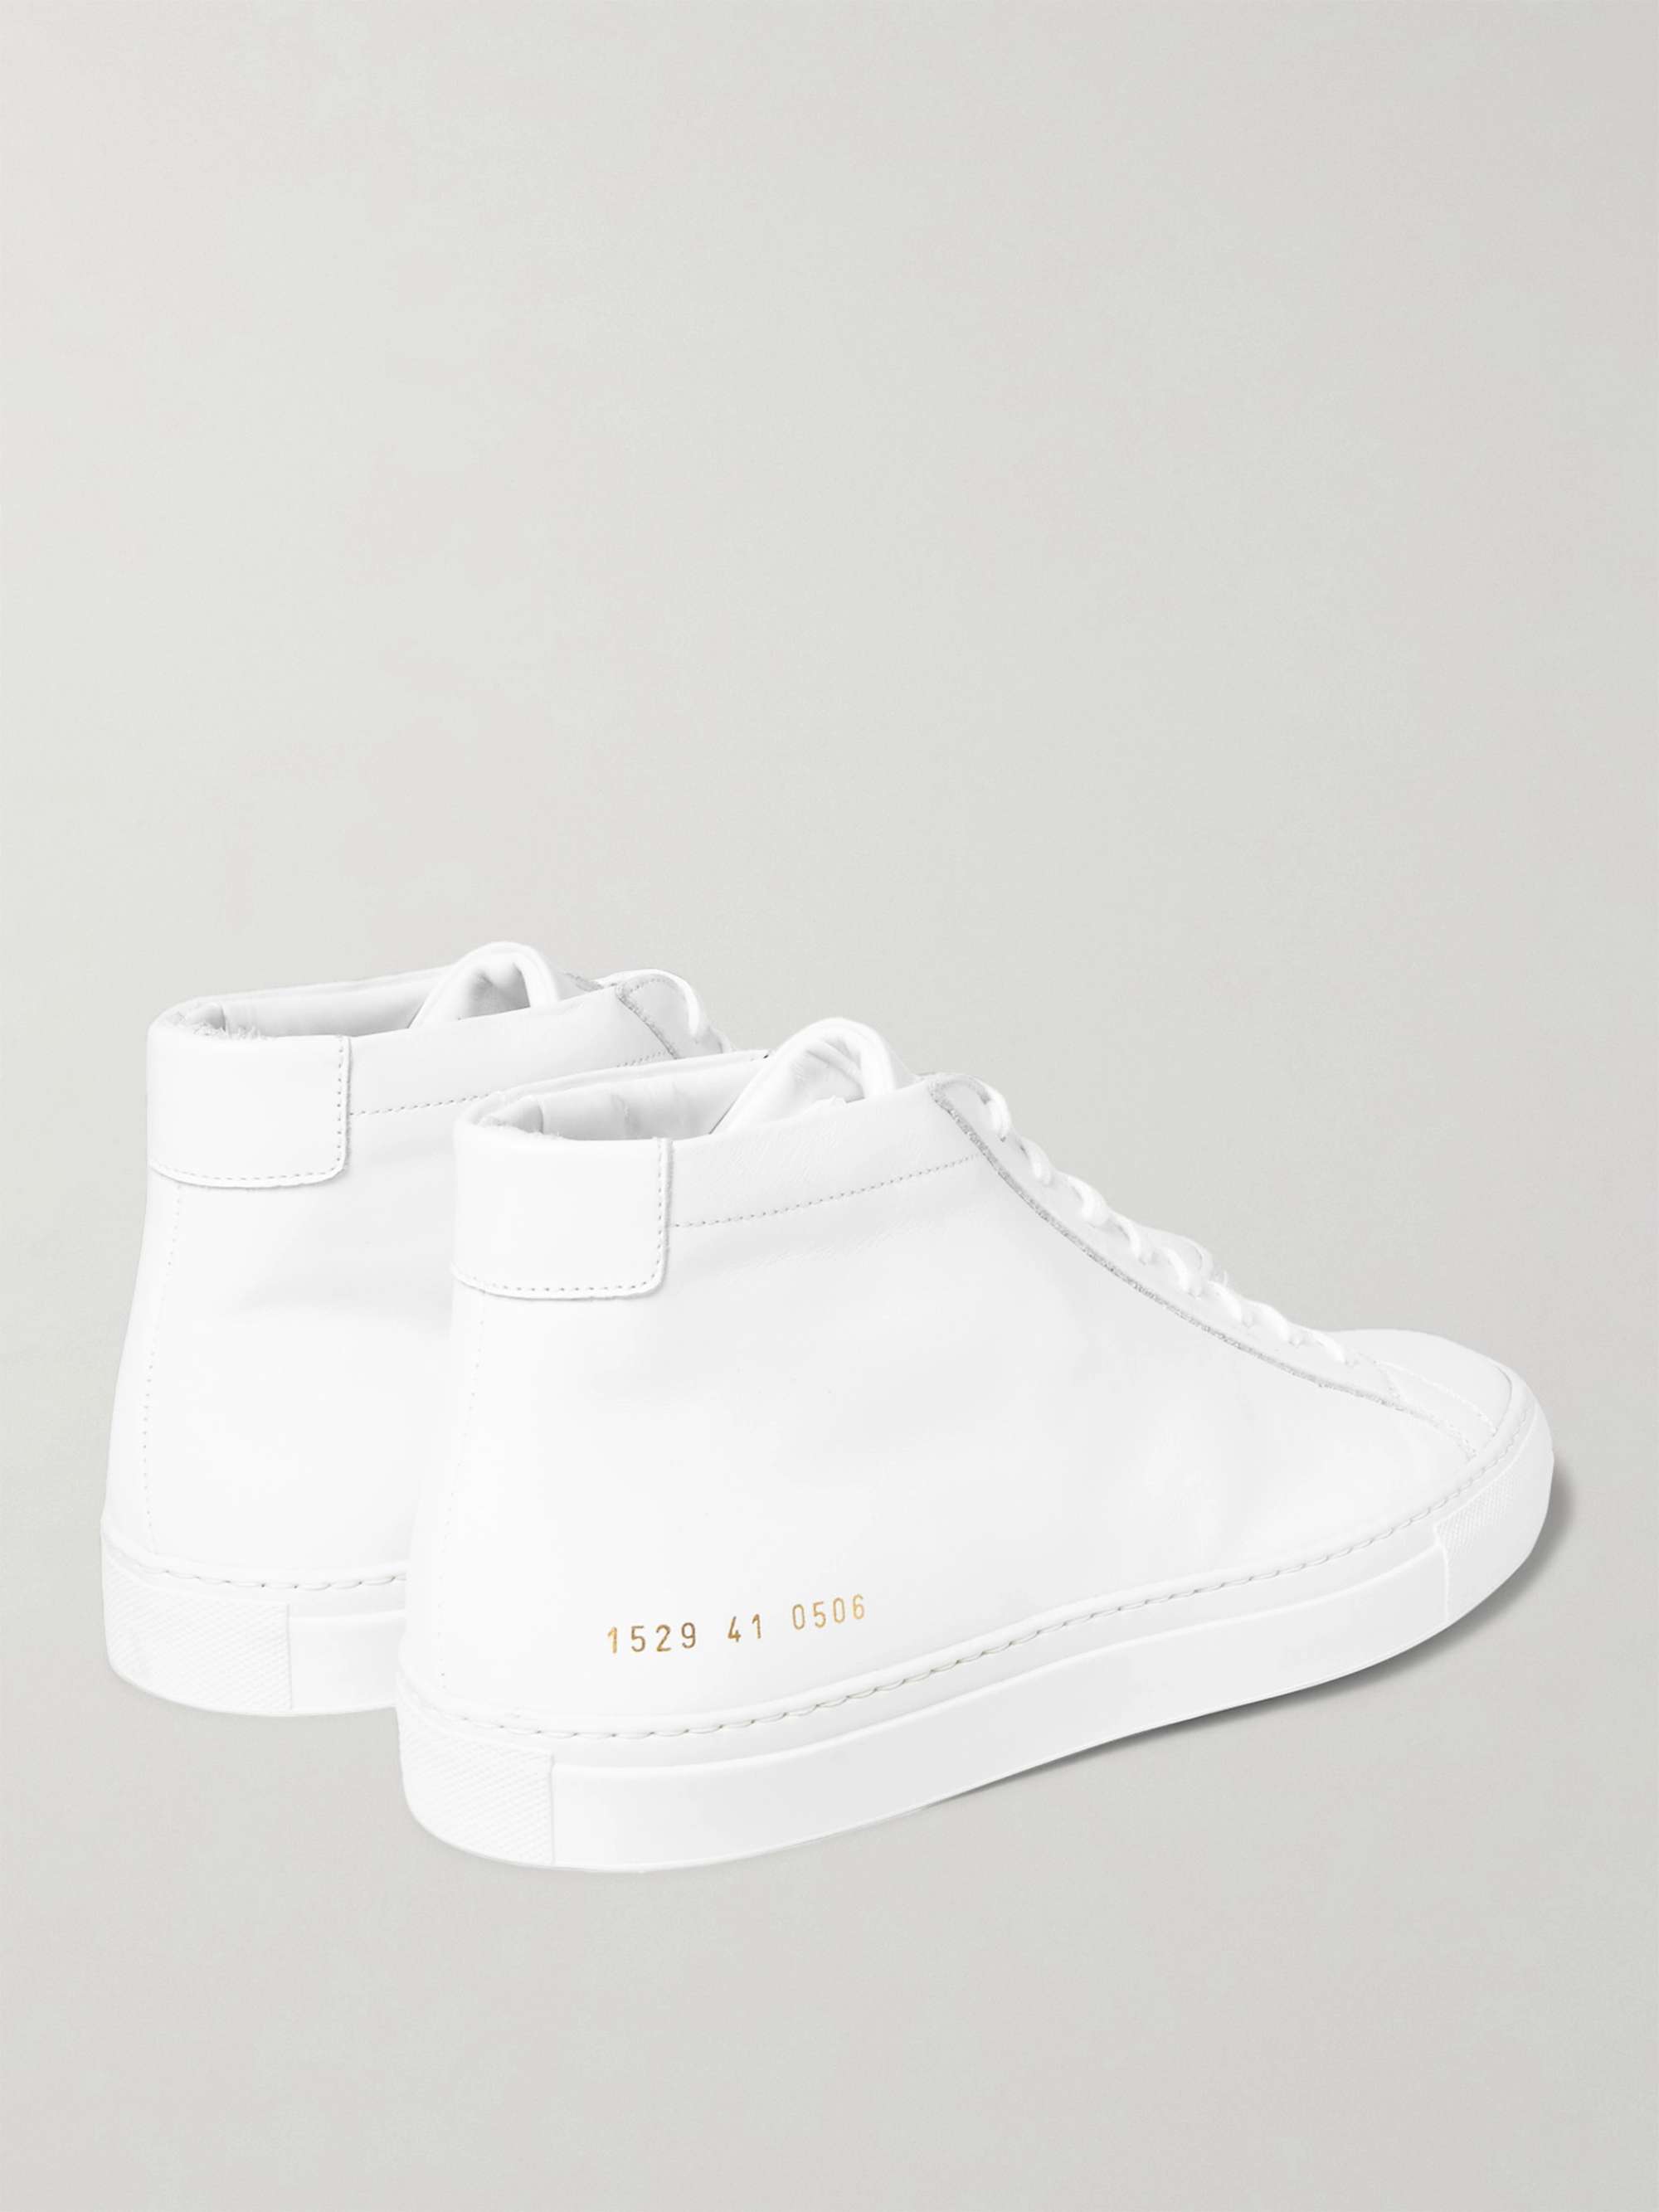 COMMON PROJECTS Original Achilles Leather High-Top Sneakers | MR PORTER